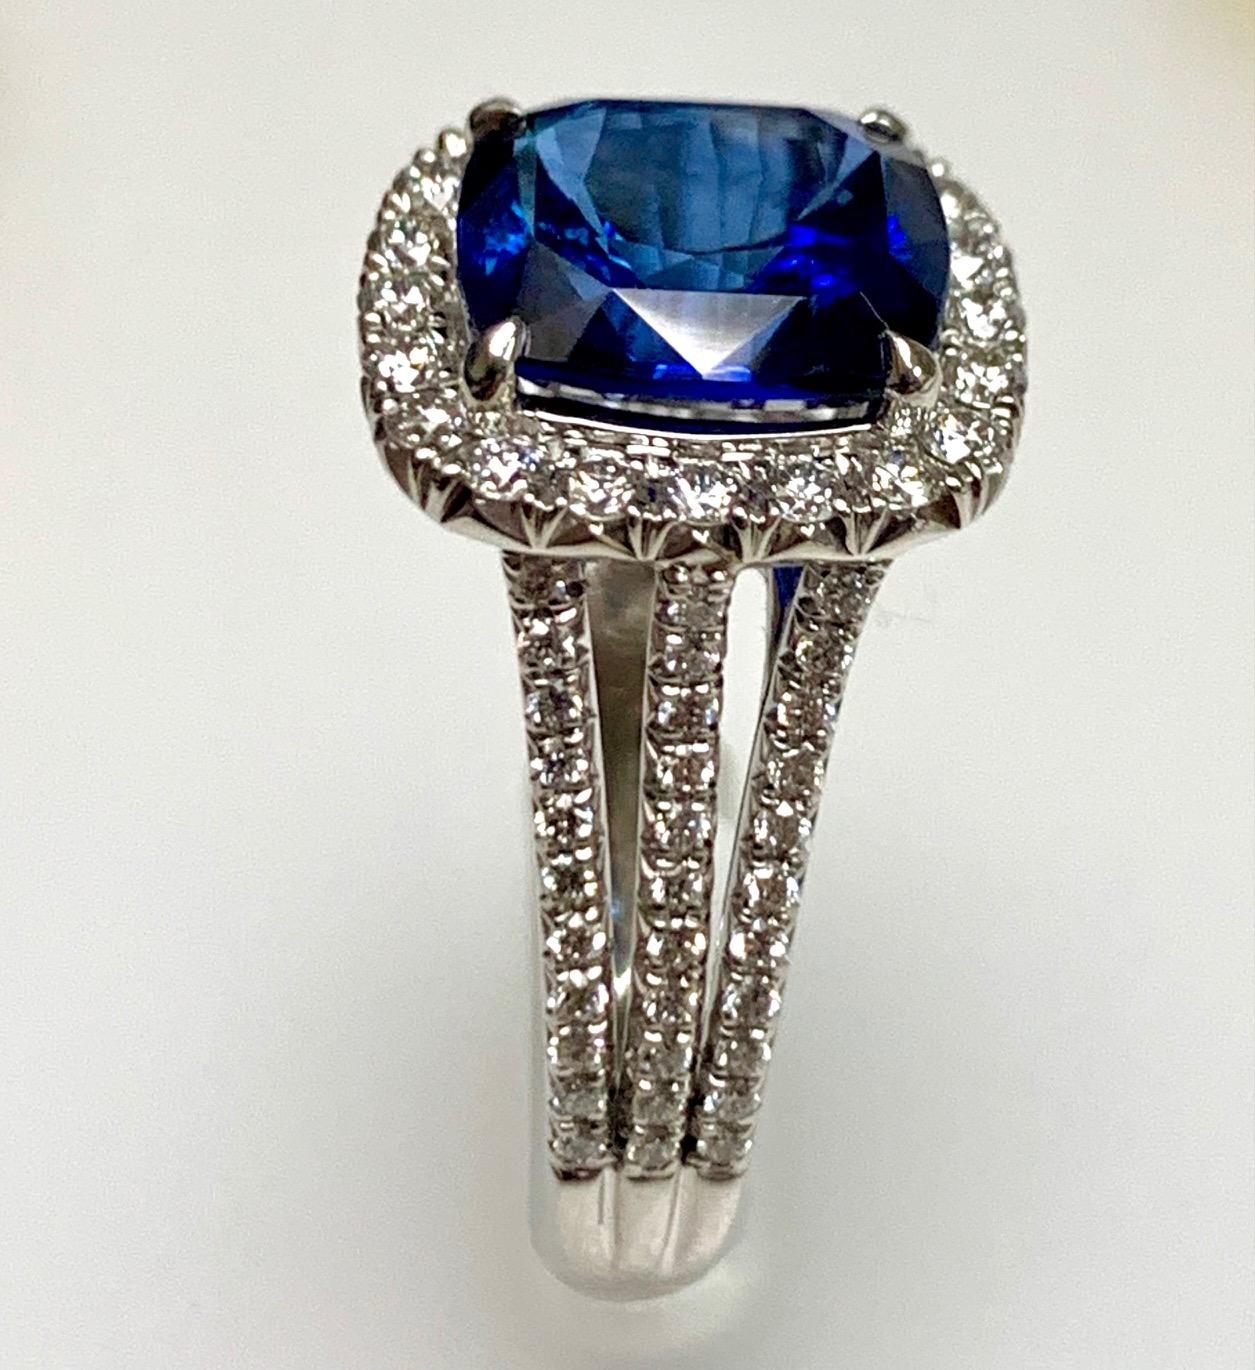 4.11 Carat Cushopn shape Royal blue sapphire certified CDC lab set in Platinum ring with 0.74 carat  Diamonds surronded and on the shanks .